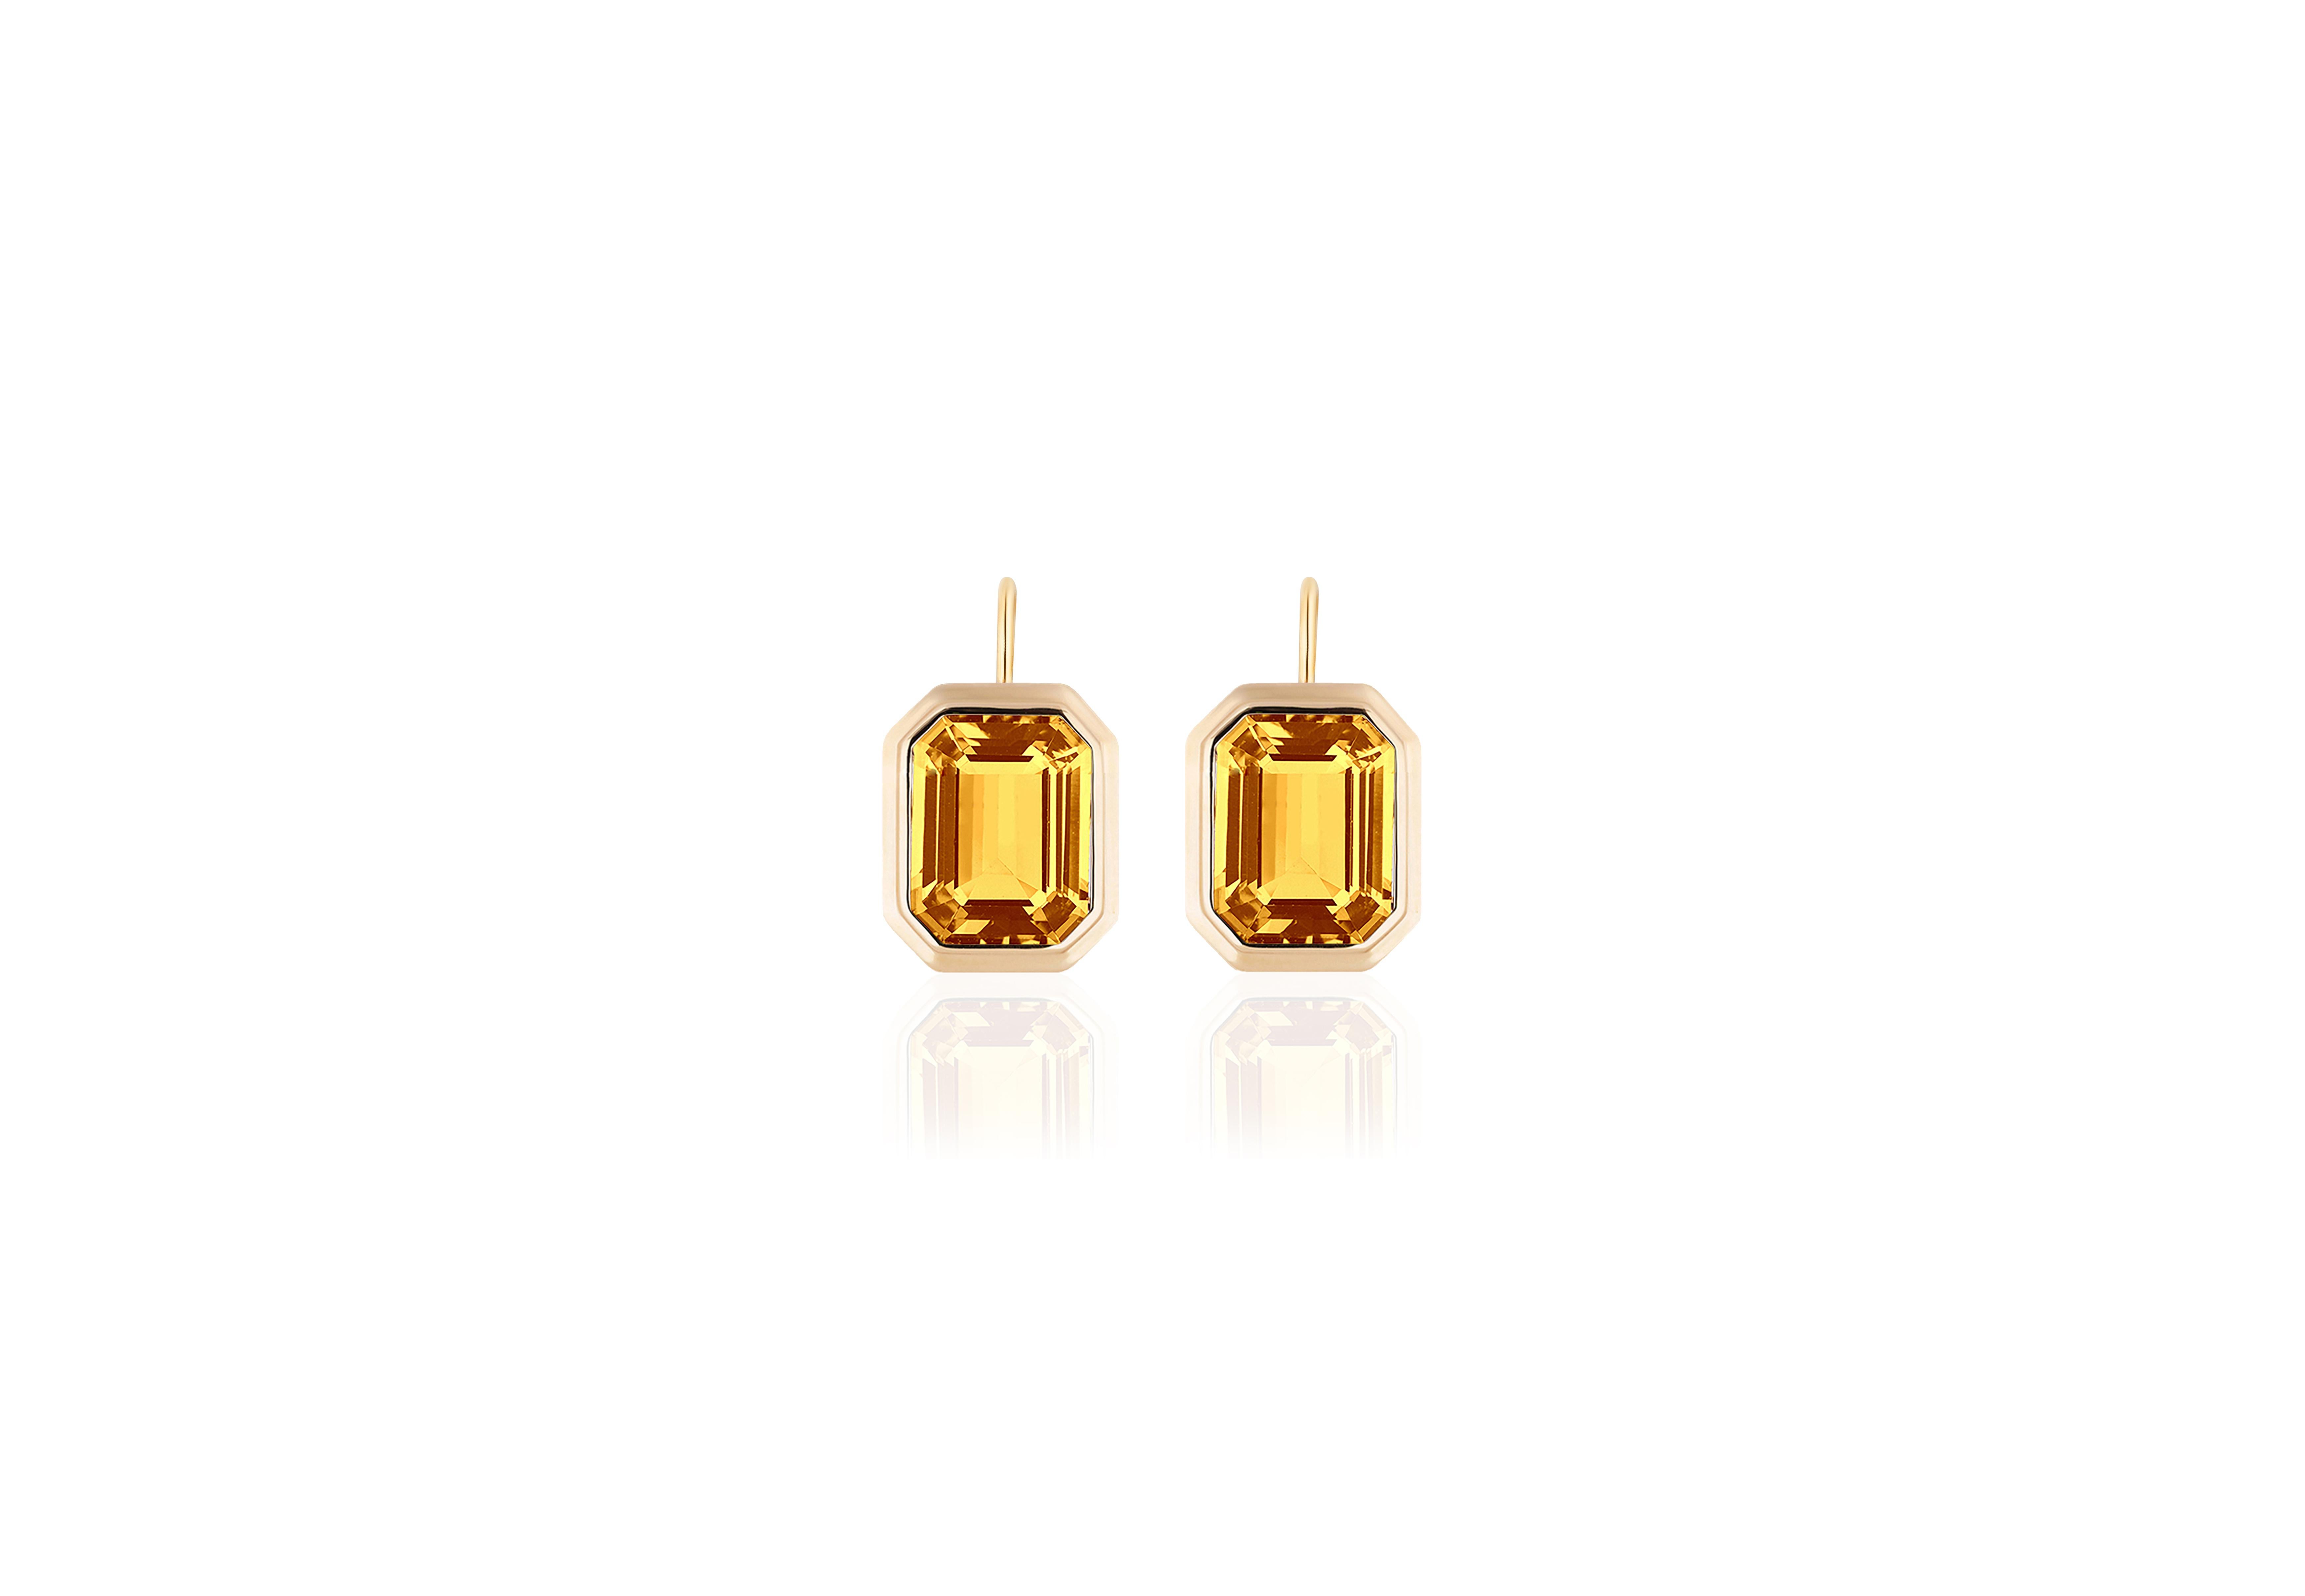 These Citrine Emerald Cut Bezel Set Earrings on Wire in 18K Yellow Gold from the 'Manhattan Collection are a stunning and sophisticated jewelry piece. These earrings feature exquisite citrine gemstones with an elegant emerald cut, cradled in a